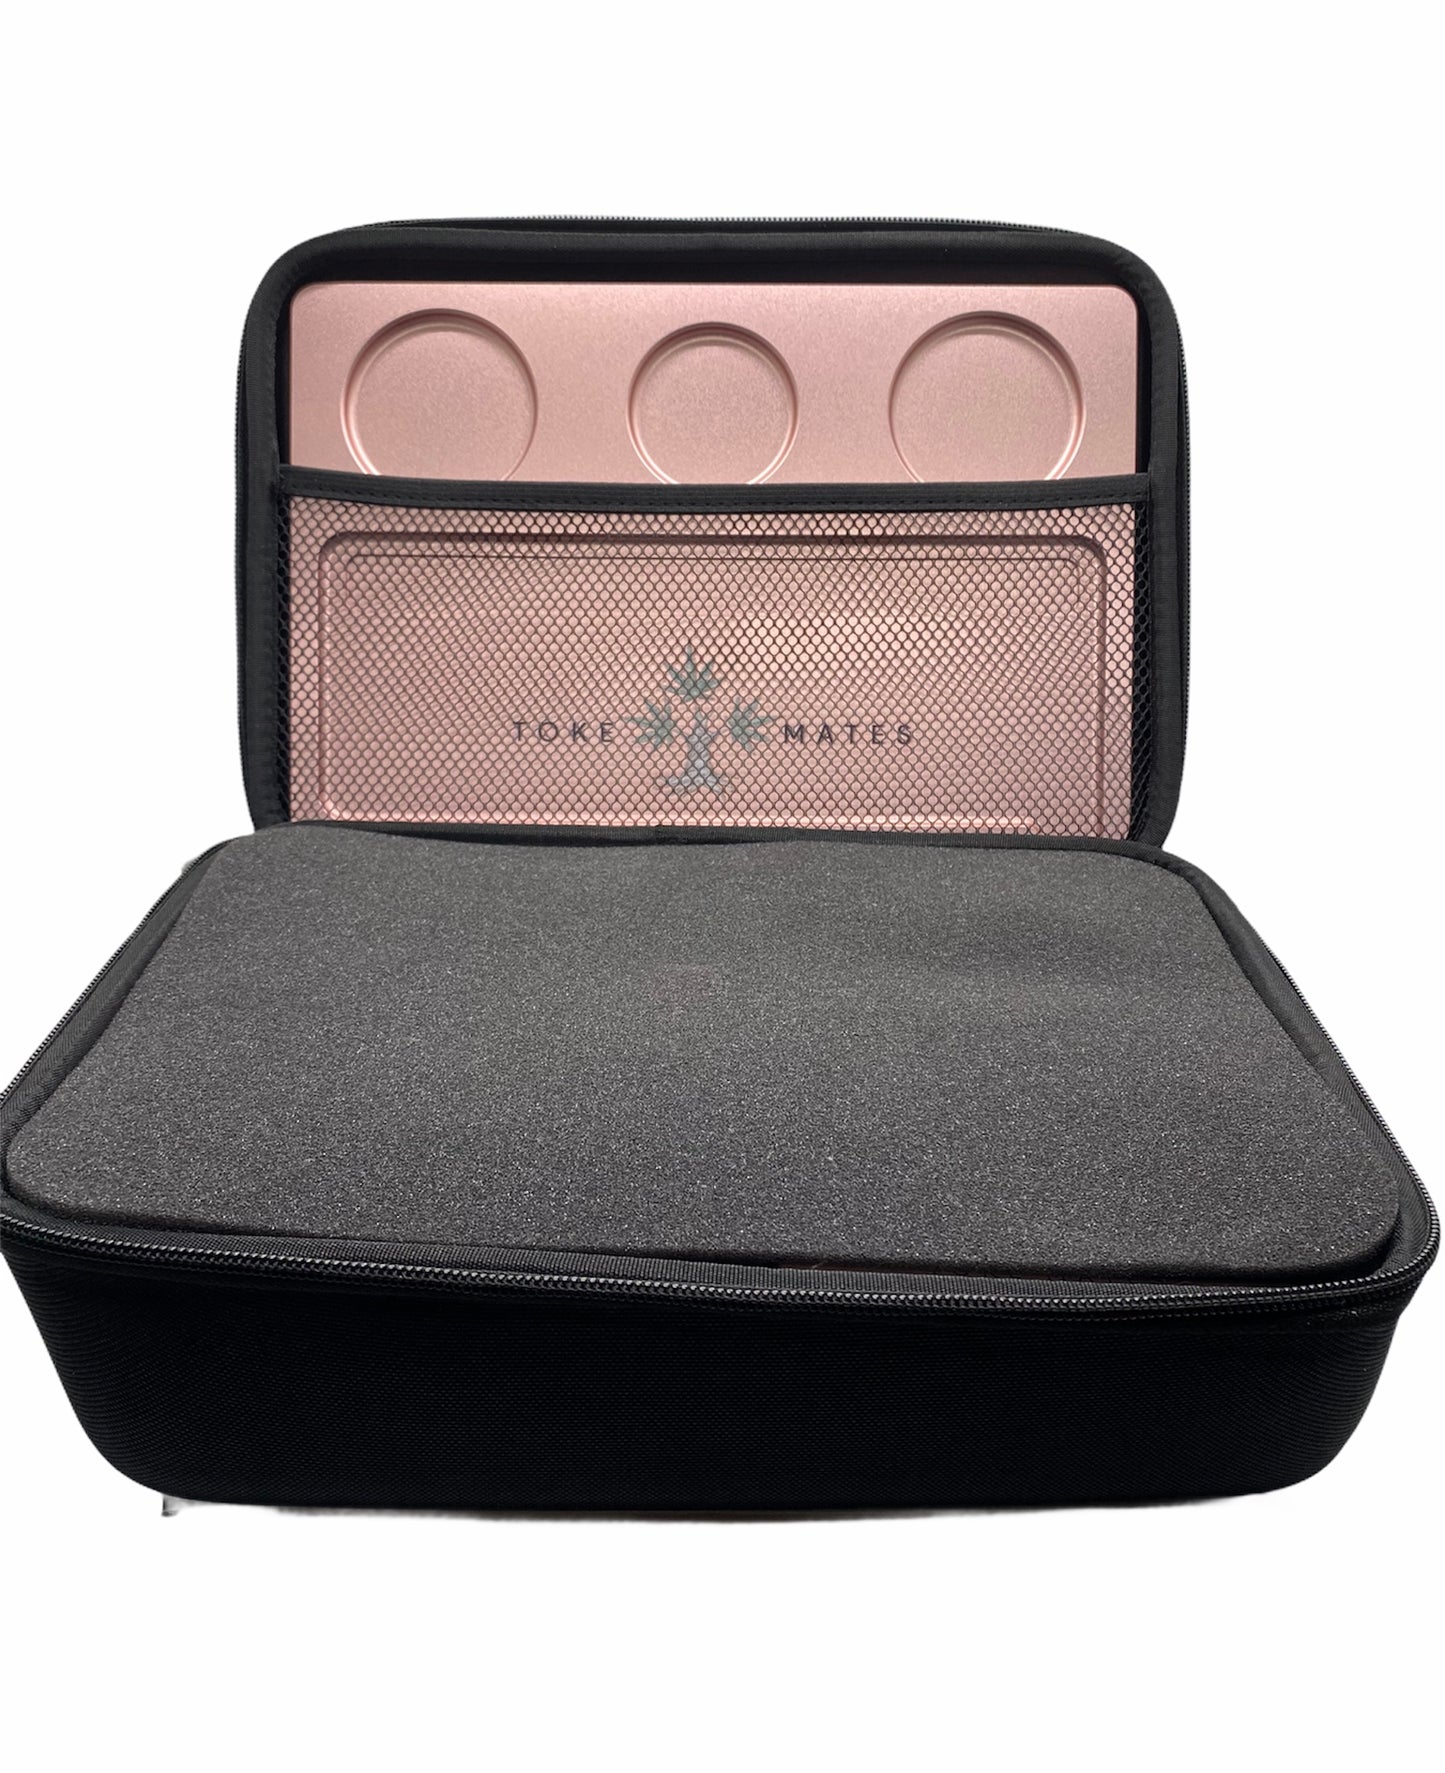 TM Carrying Case - Tokemates